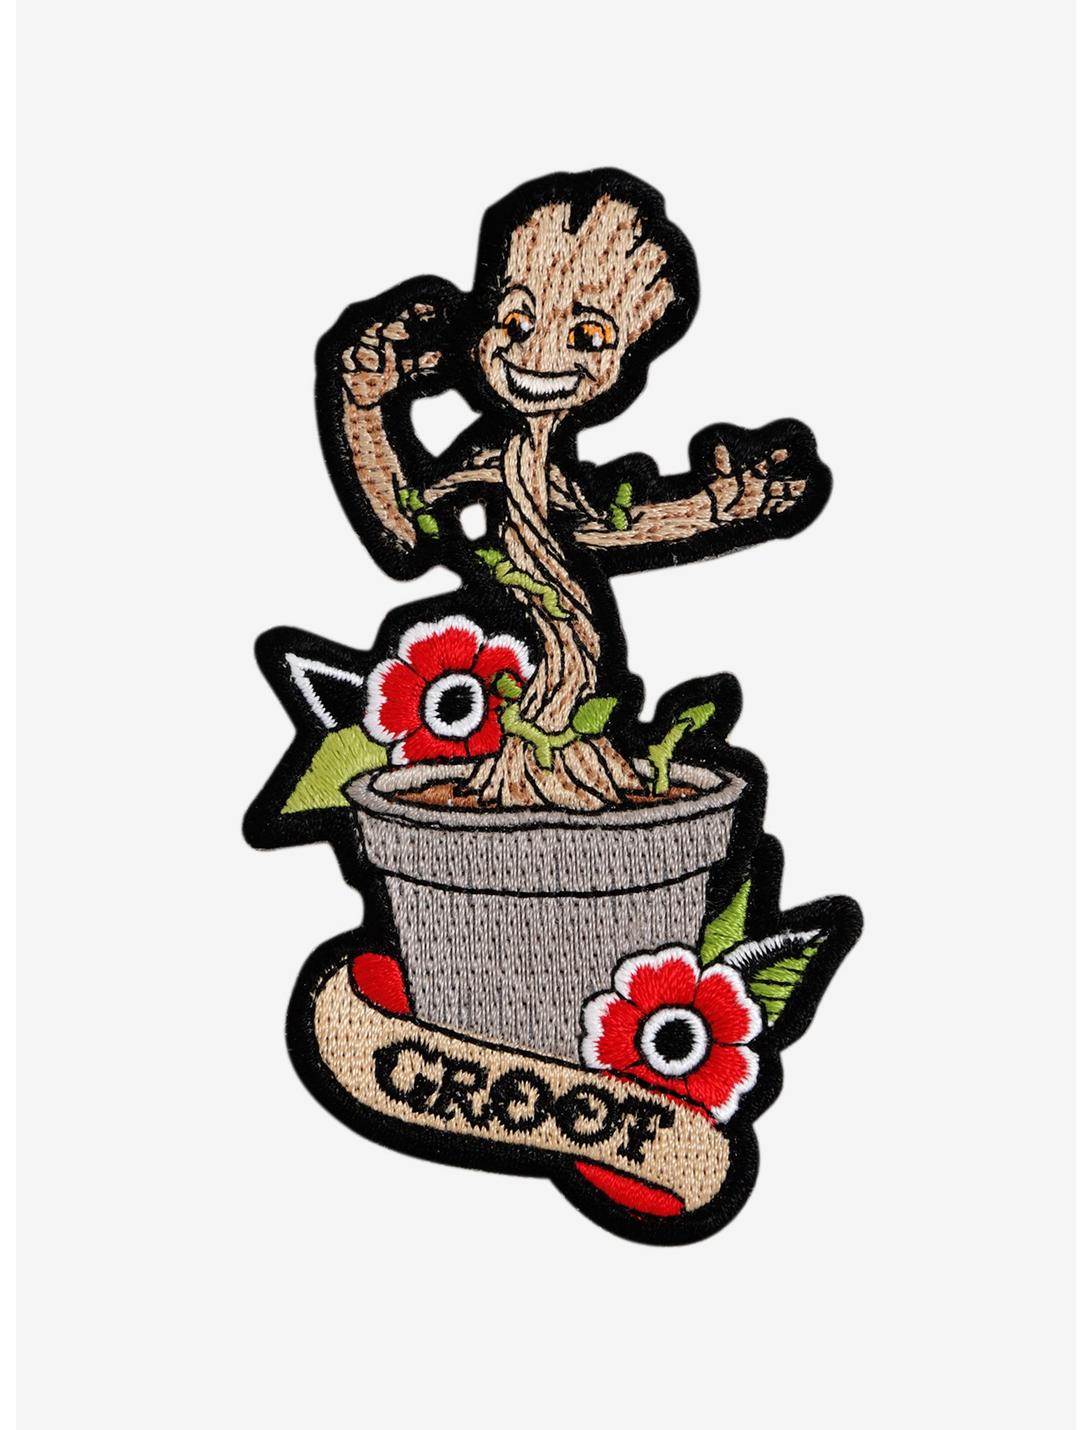 Loungefly Marvel Guardians Of The Galaxy Dancing Groot Iron-On Patch, , hi-res